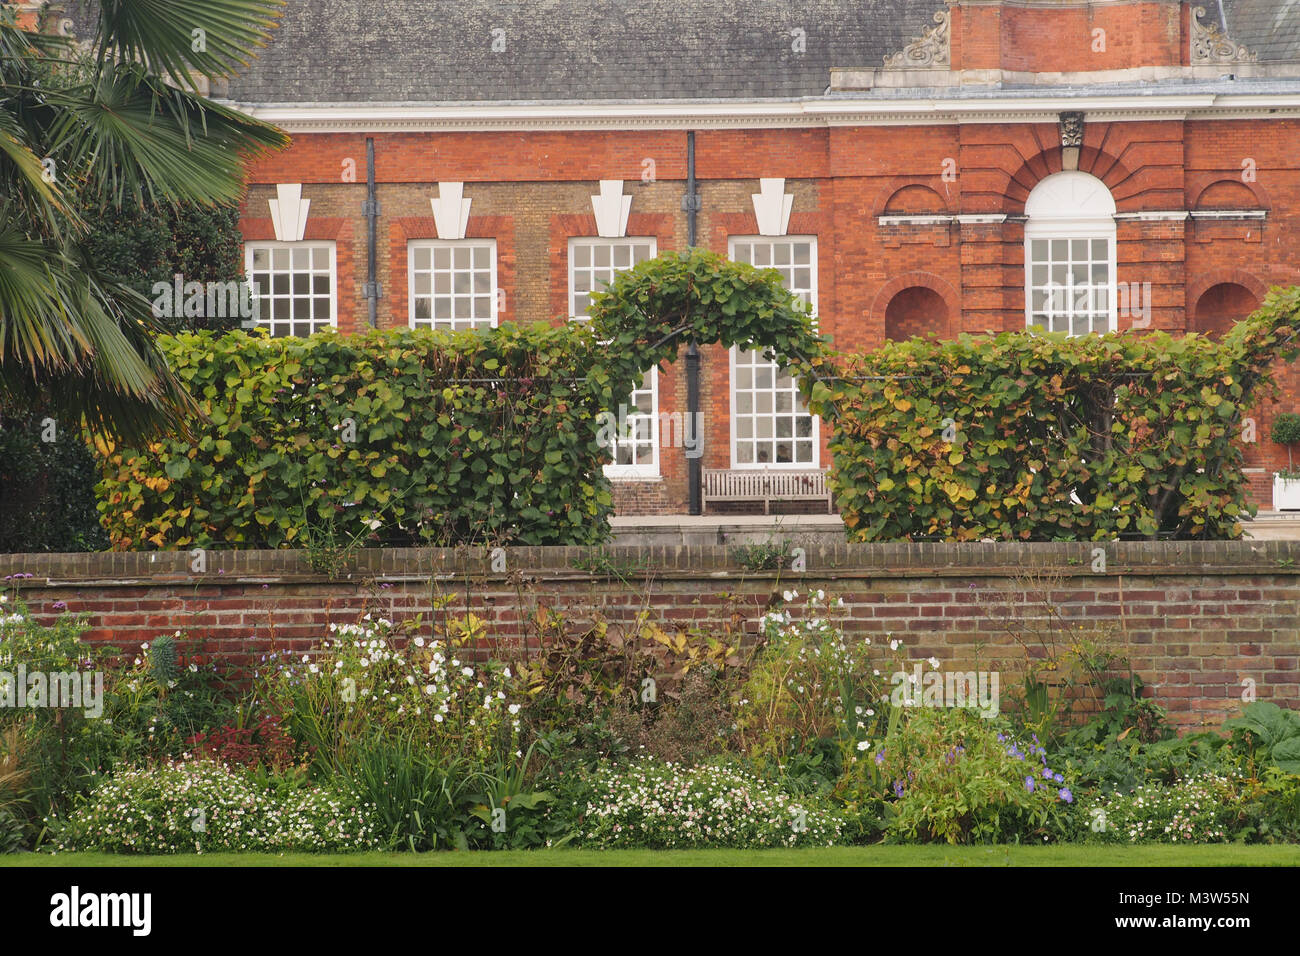 A view of part of Kensington Palace from the sunken garden with the garden wall and a trained hedge archway Stock Photo